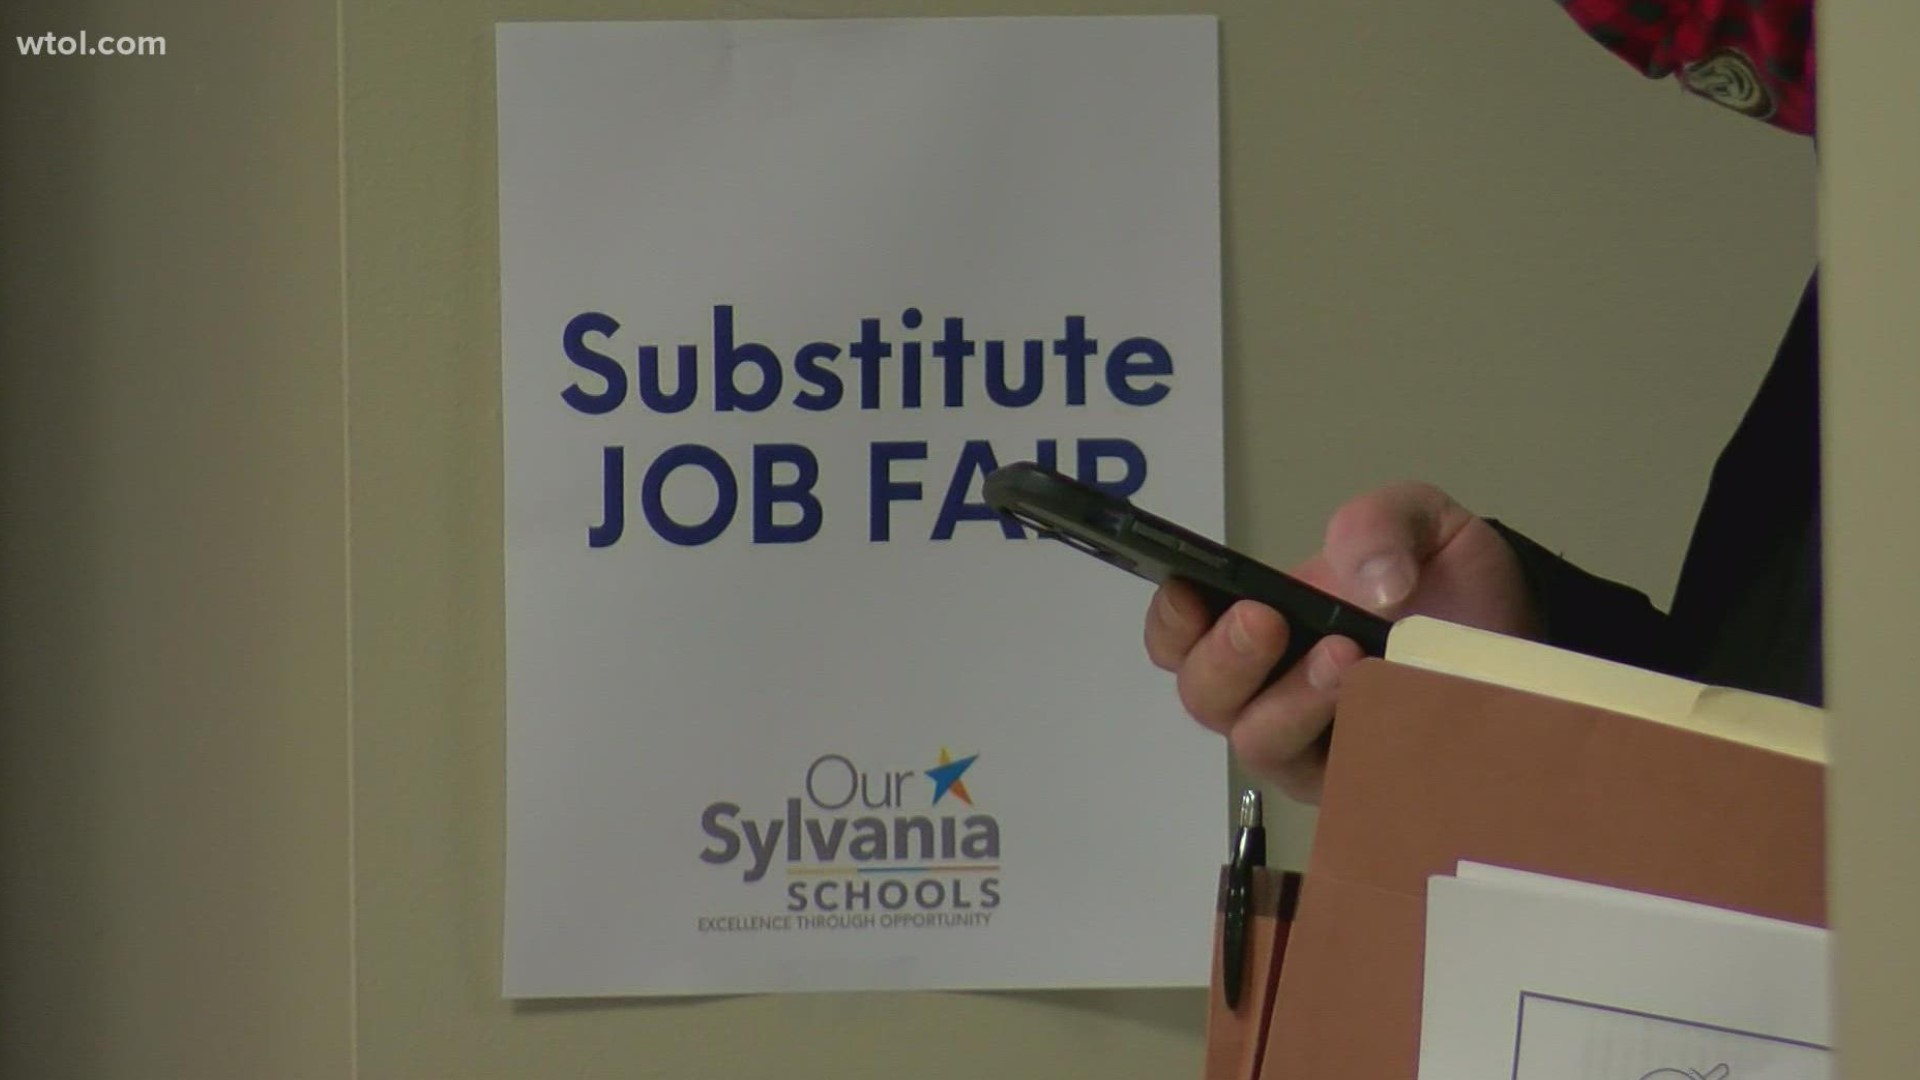 Sylvania and Perrysburg school districts are hosting job fairs to attract candidates for numerous open positions desperately needed to keep kids in class.